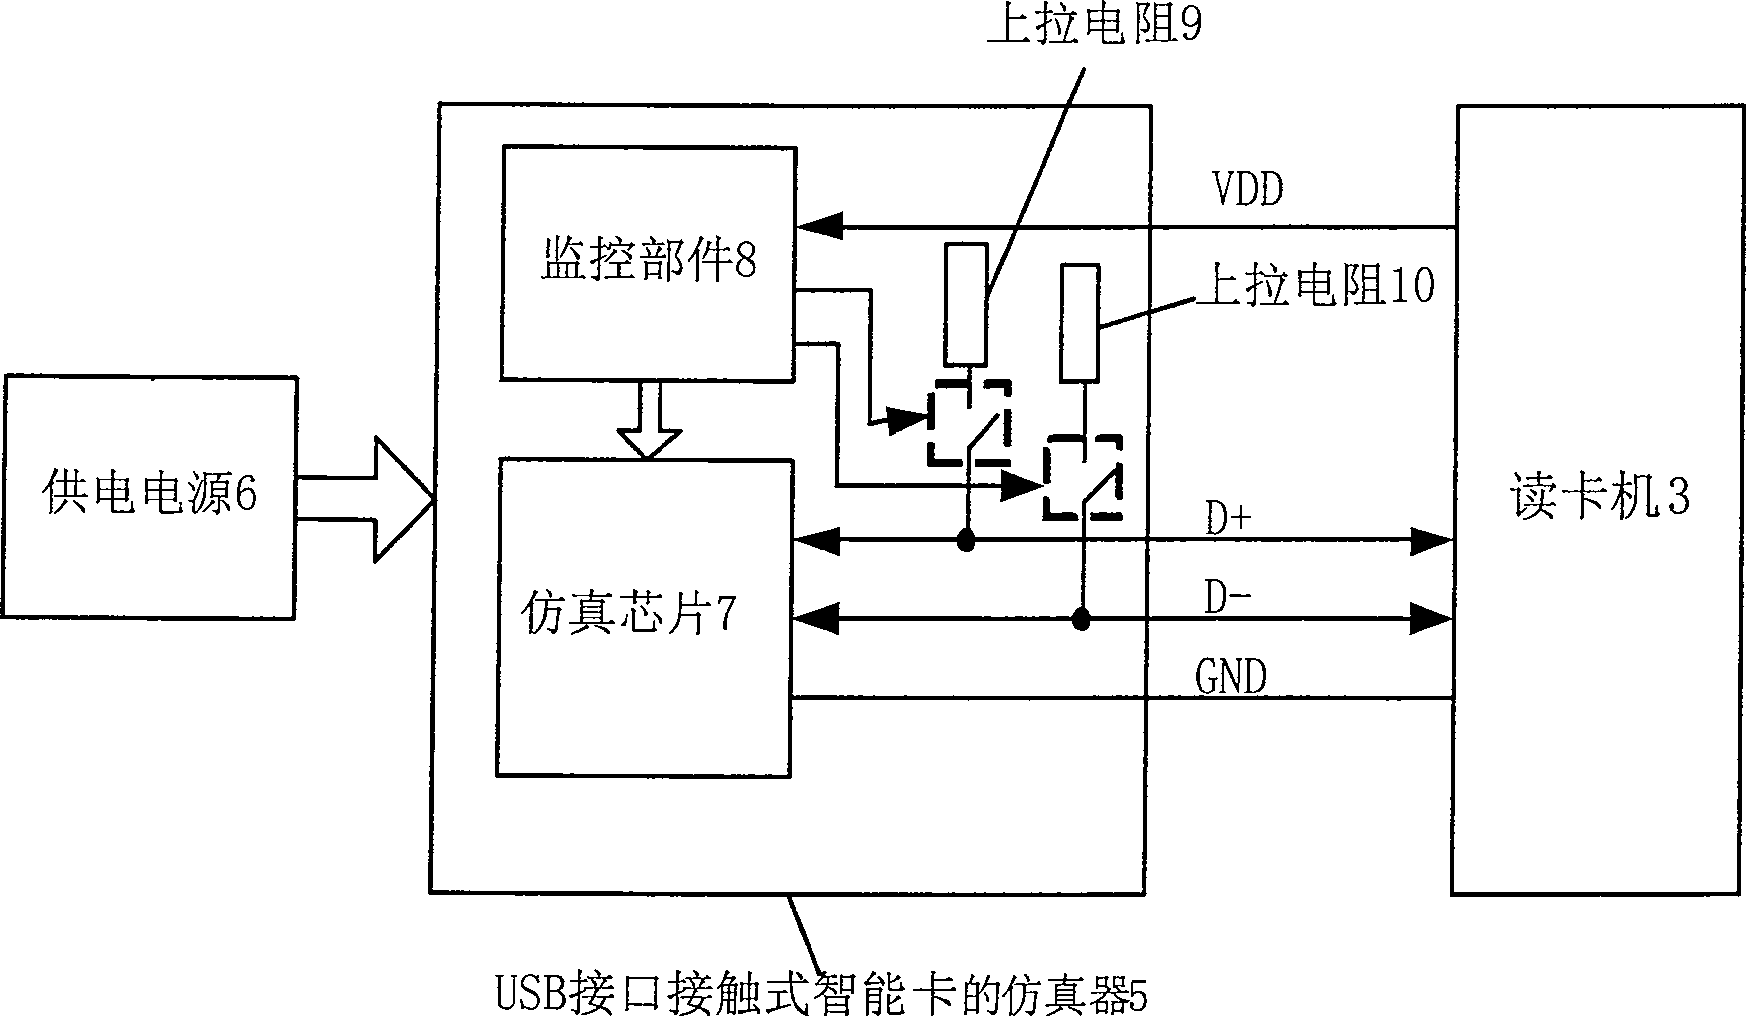 Emulator of contact type intelligent card with USB interface